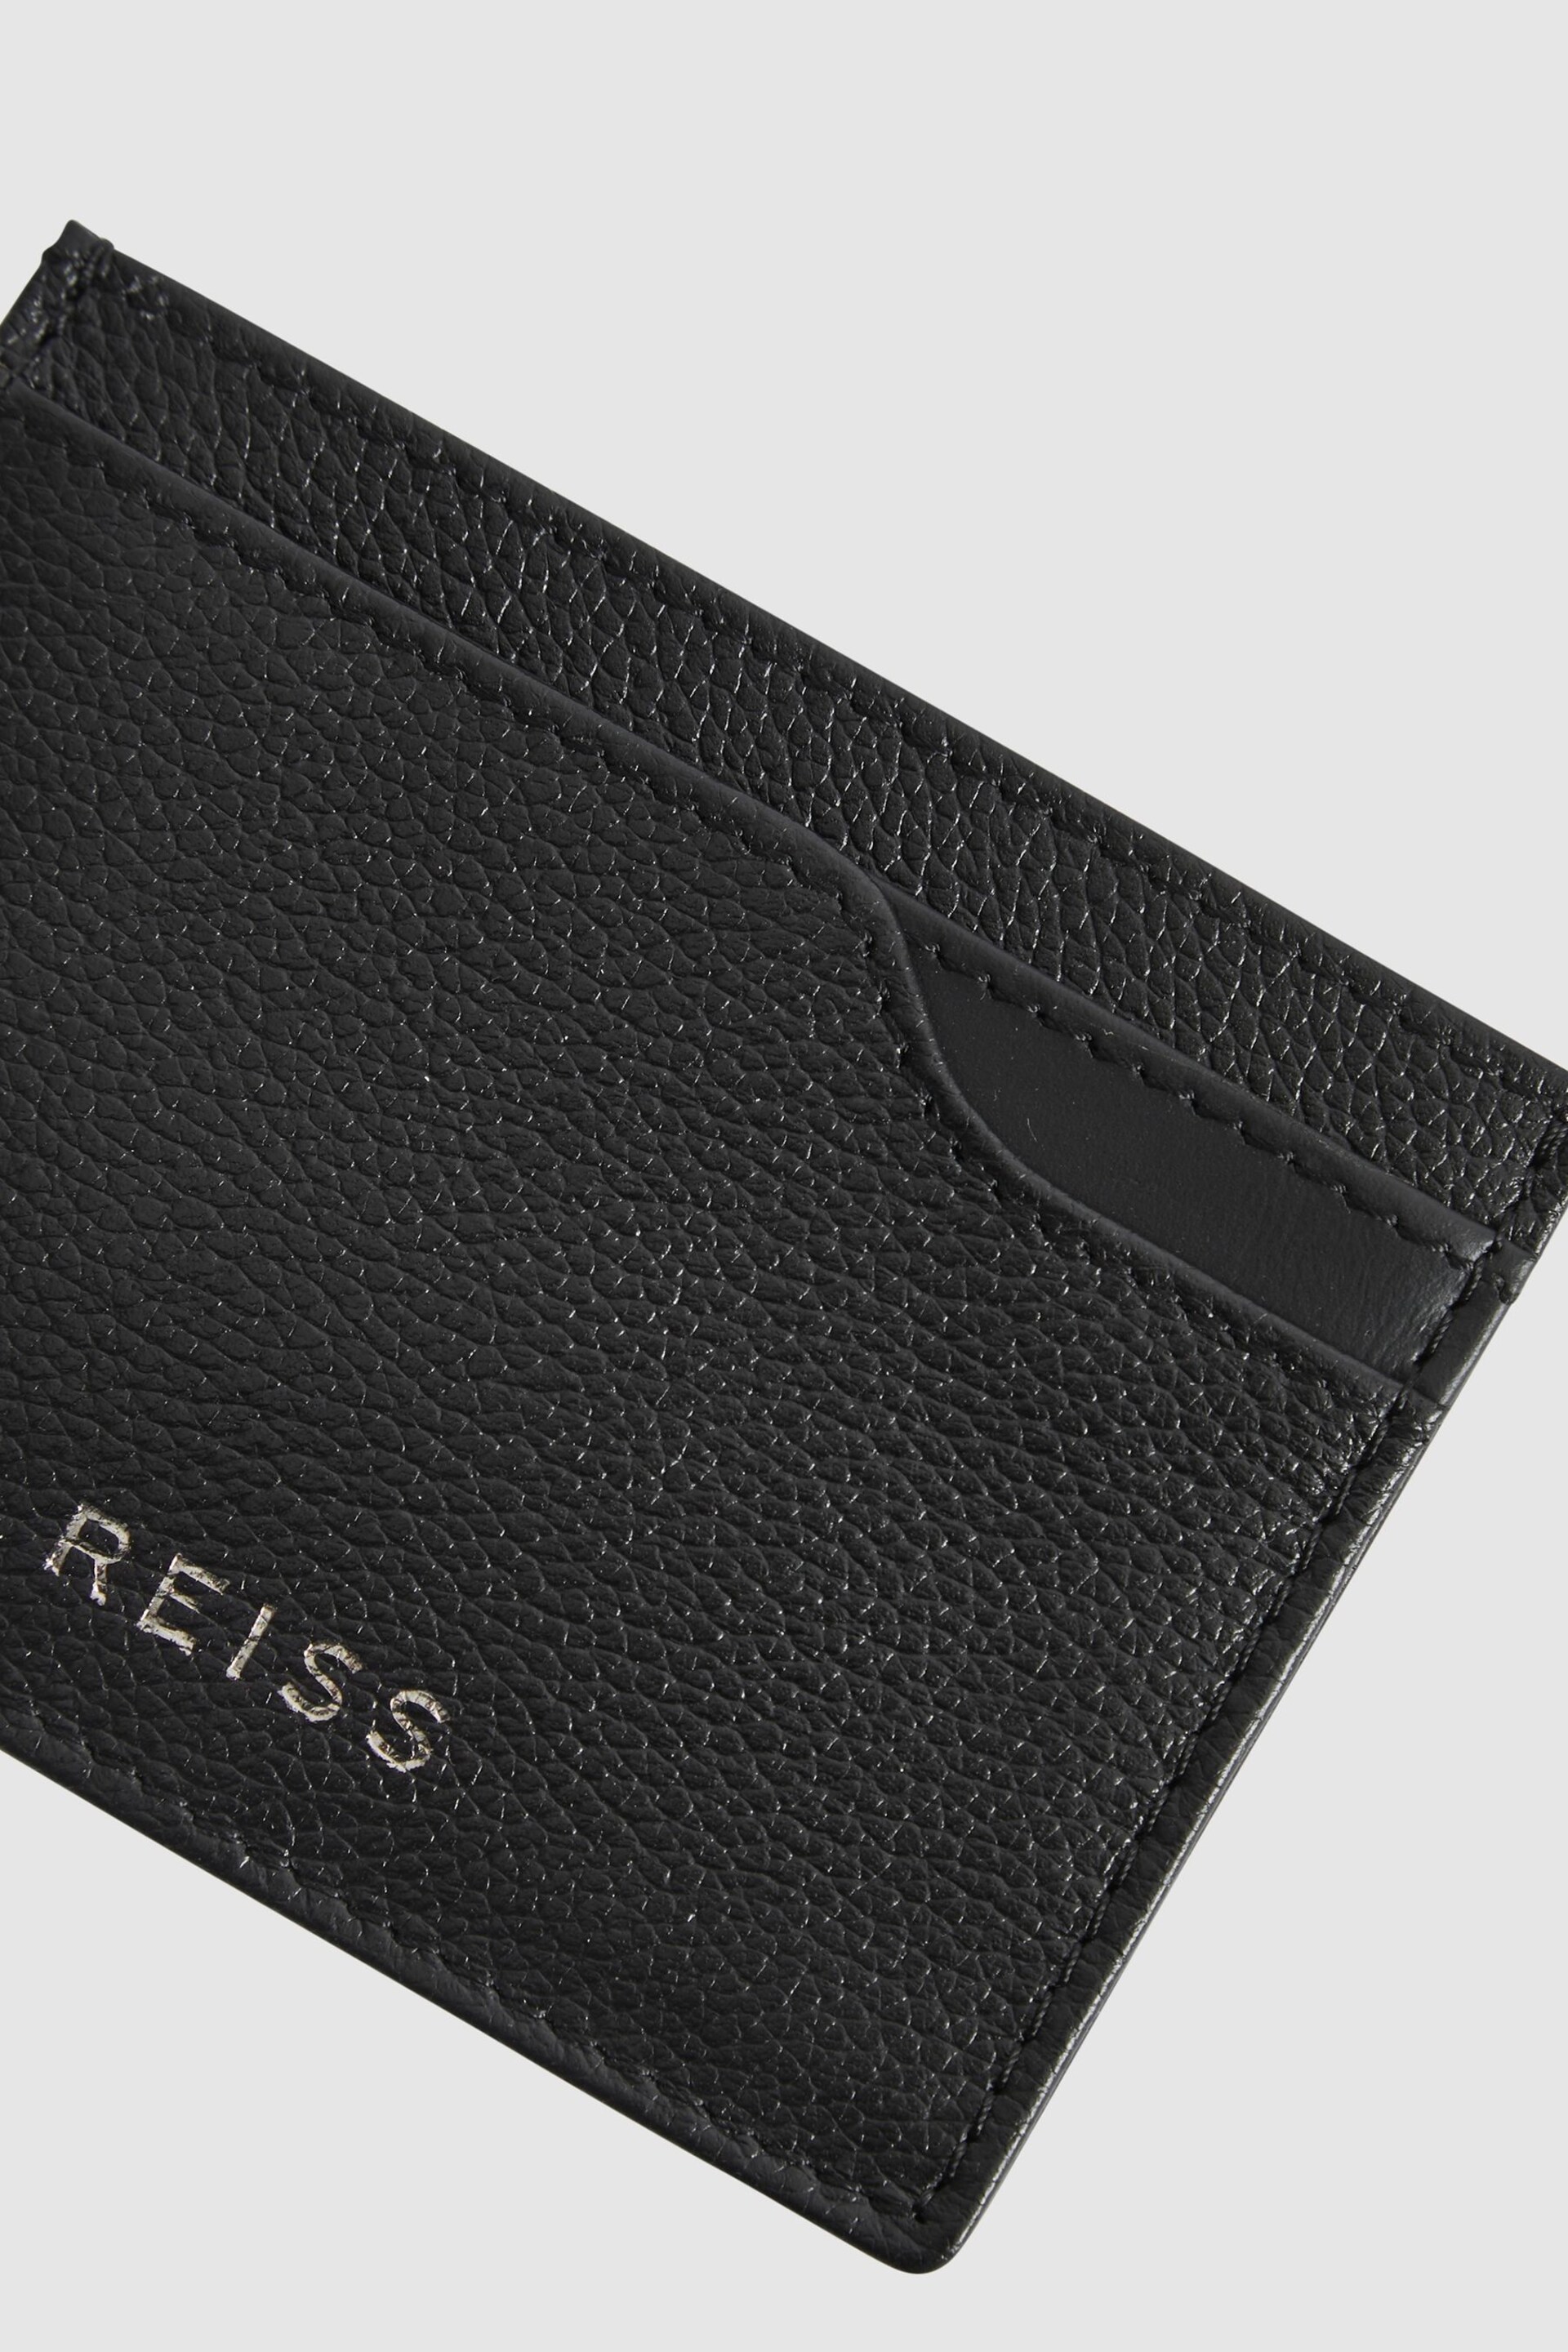 Reiss Black Cabot Leather Card Holder - Image 2 of 2